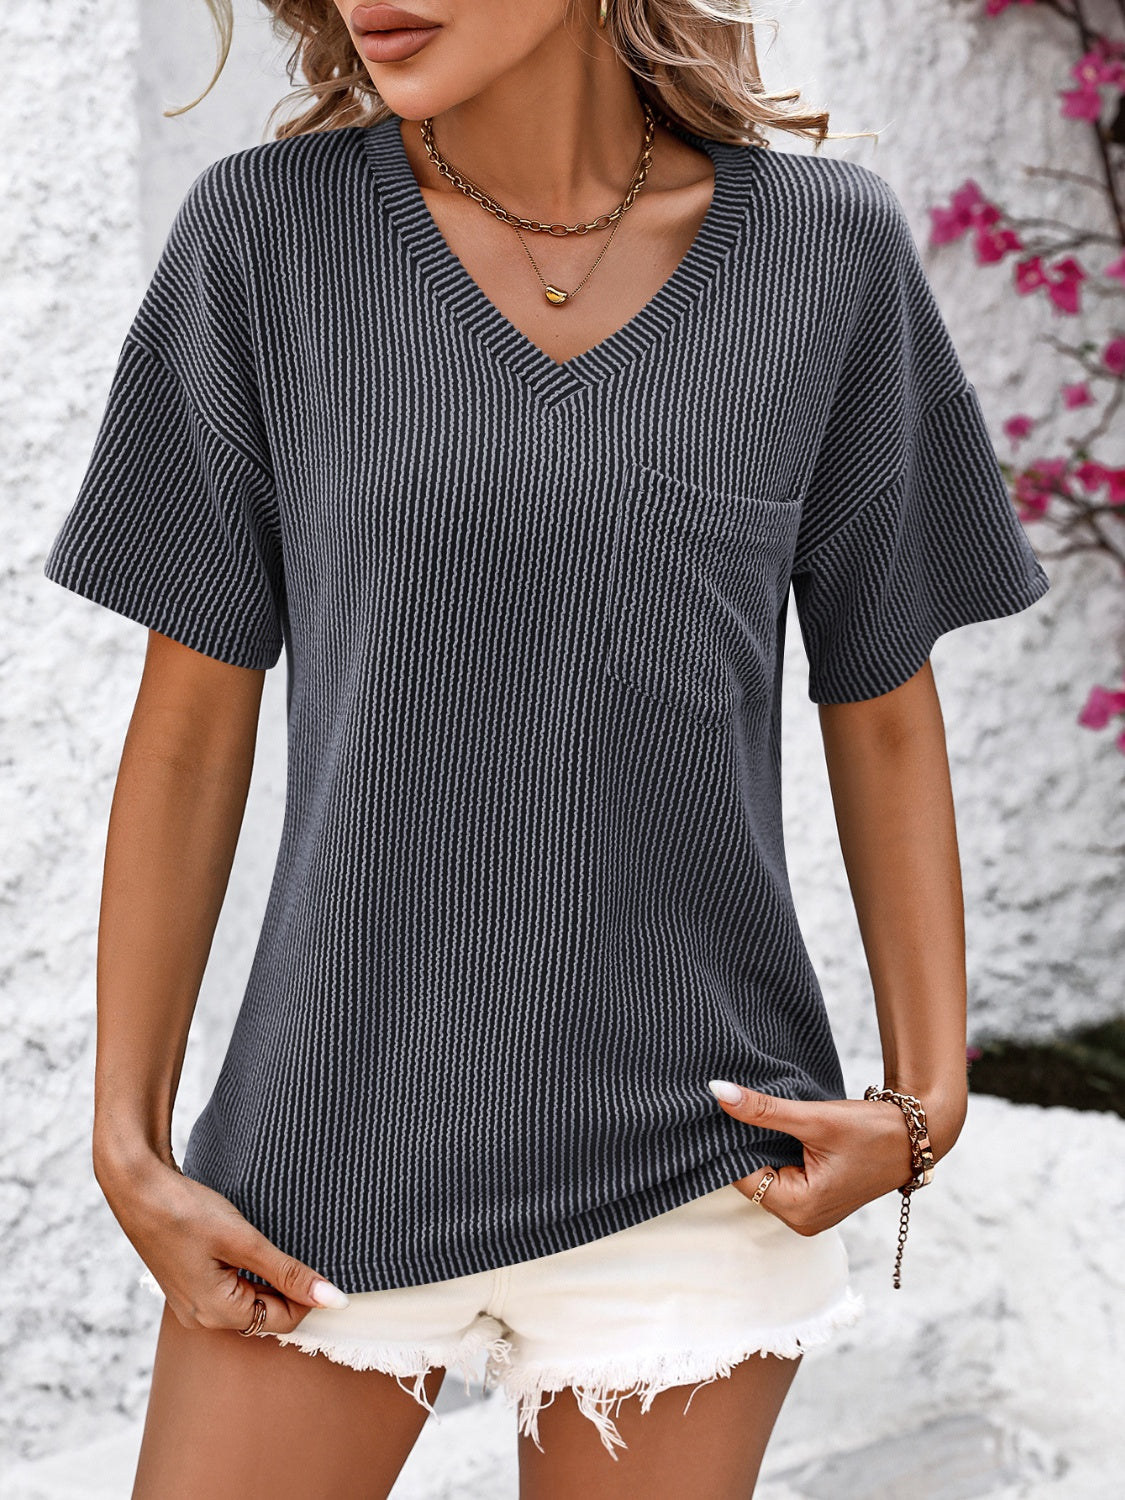 Women's Clothing, V-Neck Dropped Shoulder T-Shirt, Front View both hands in pockets Charcoal, Rochelle's House